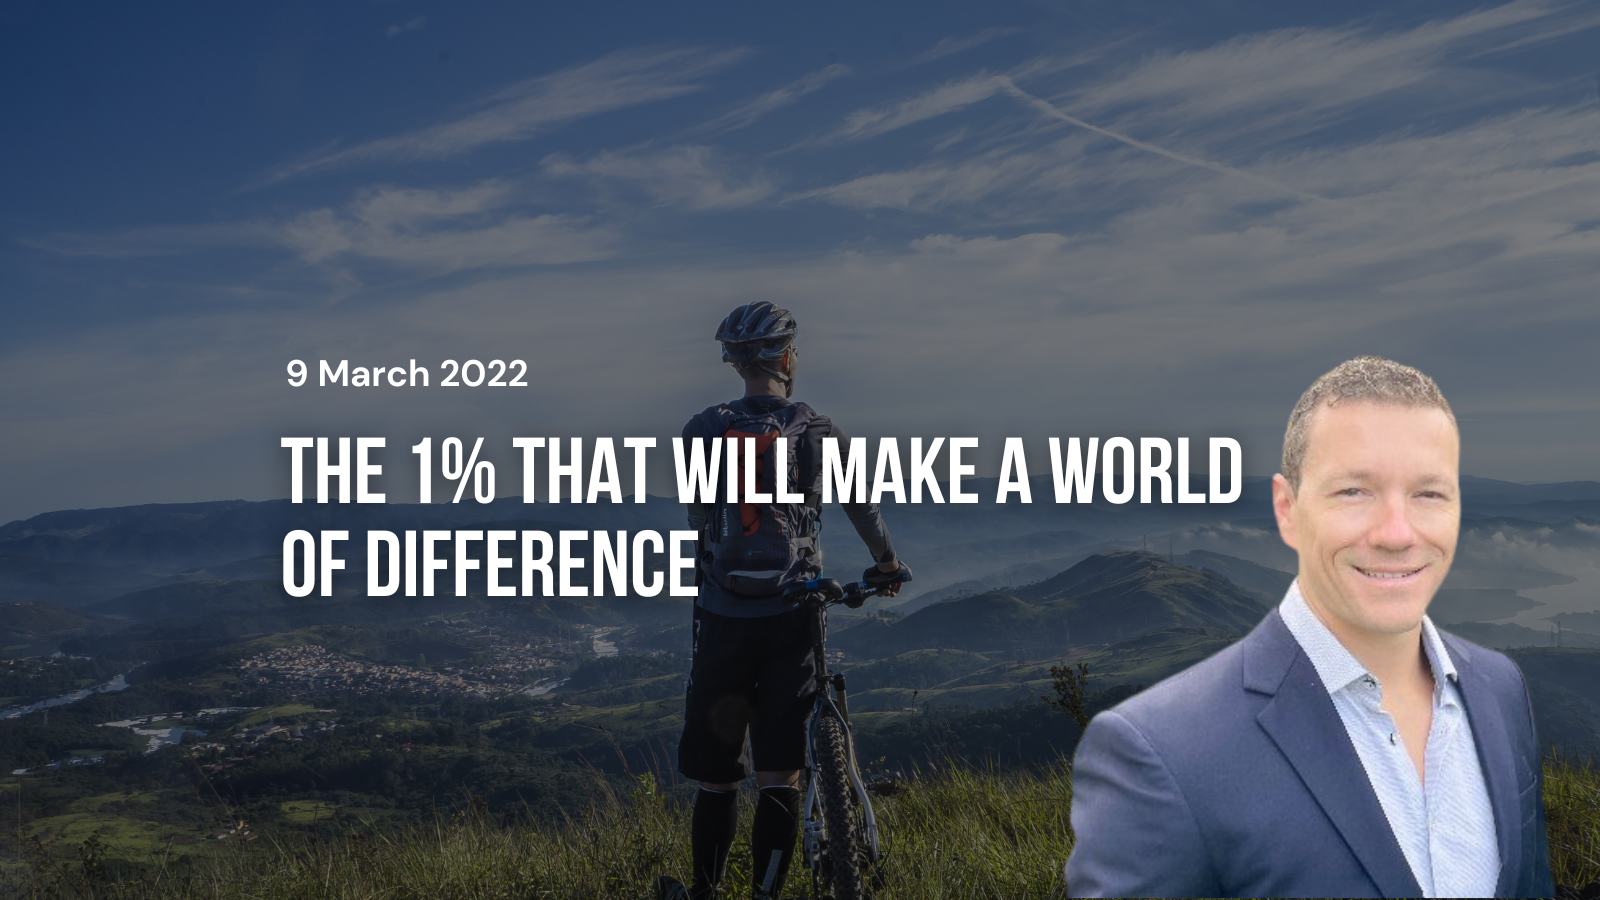 The 1% That Will Make a World of Difference